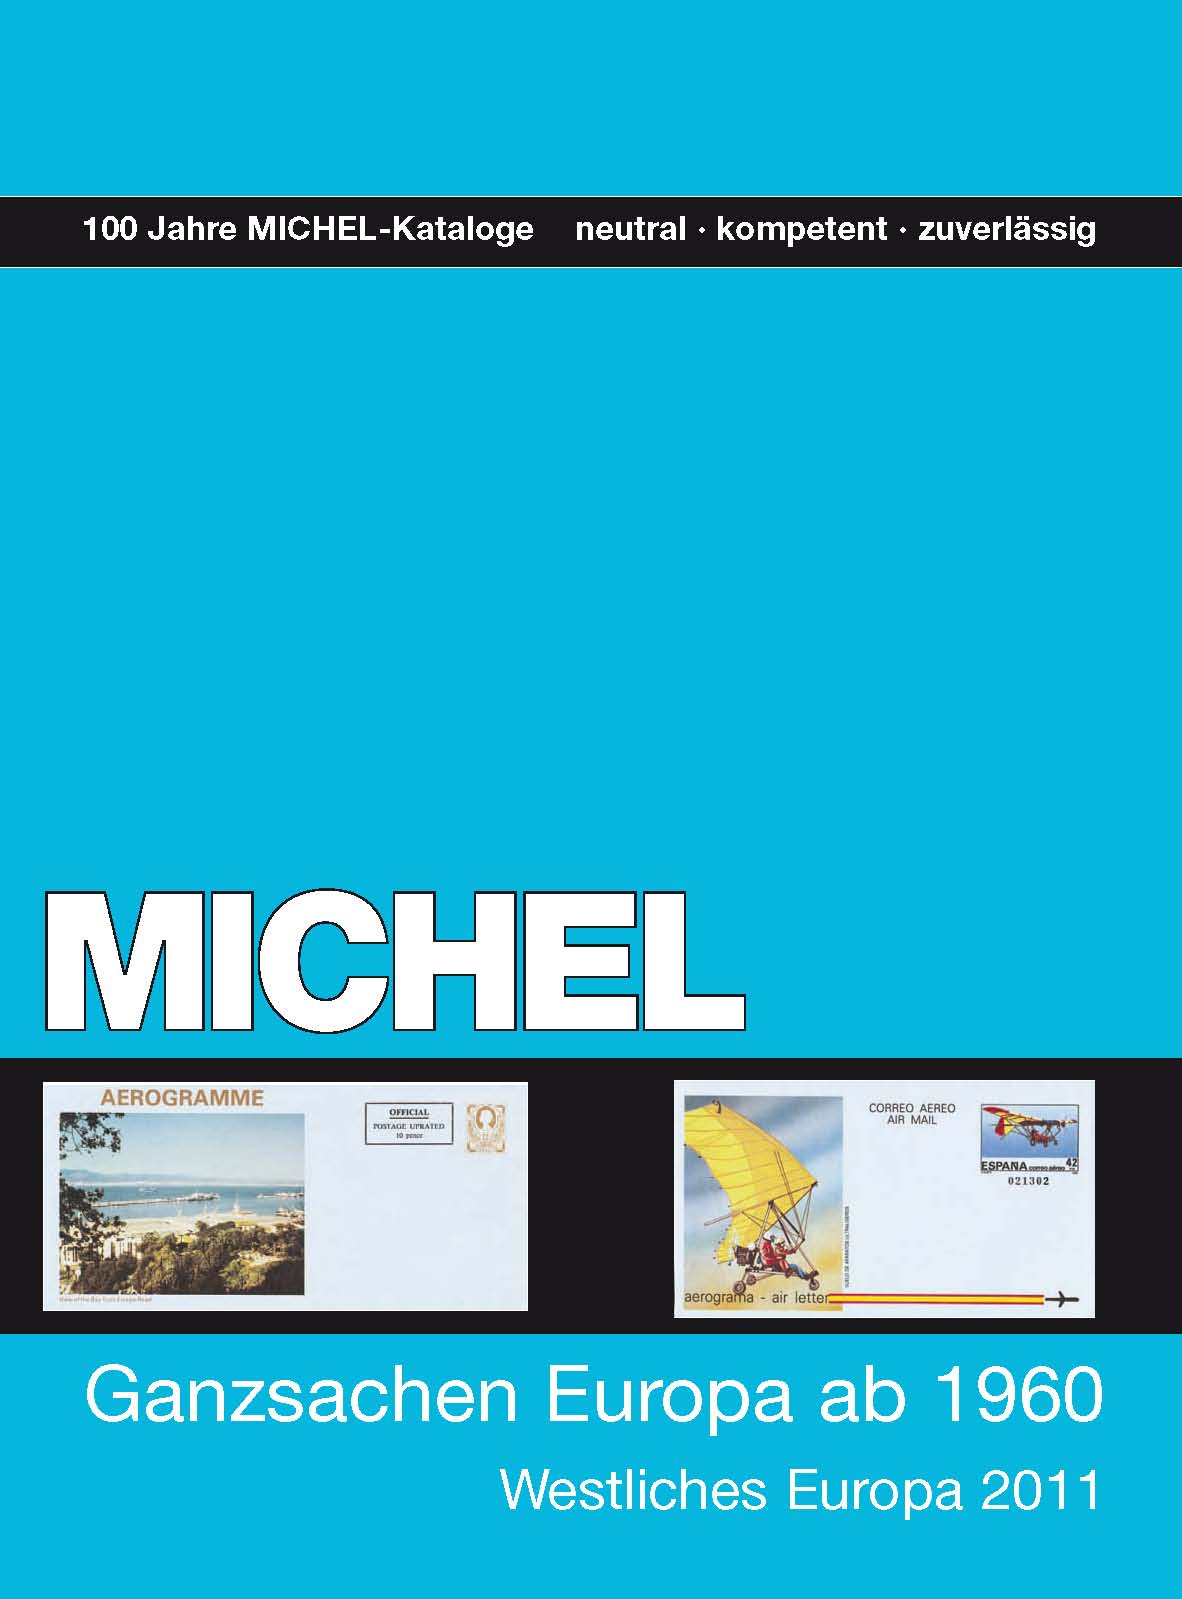 Michel postal stationery catalogue Europe since 1960